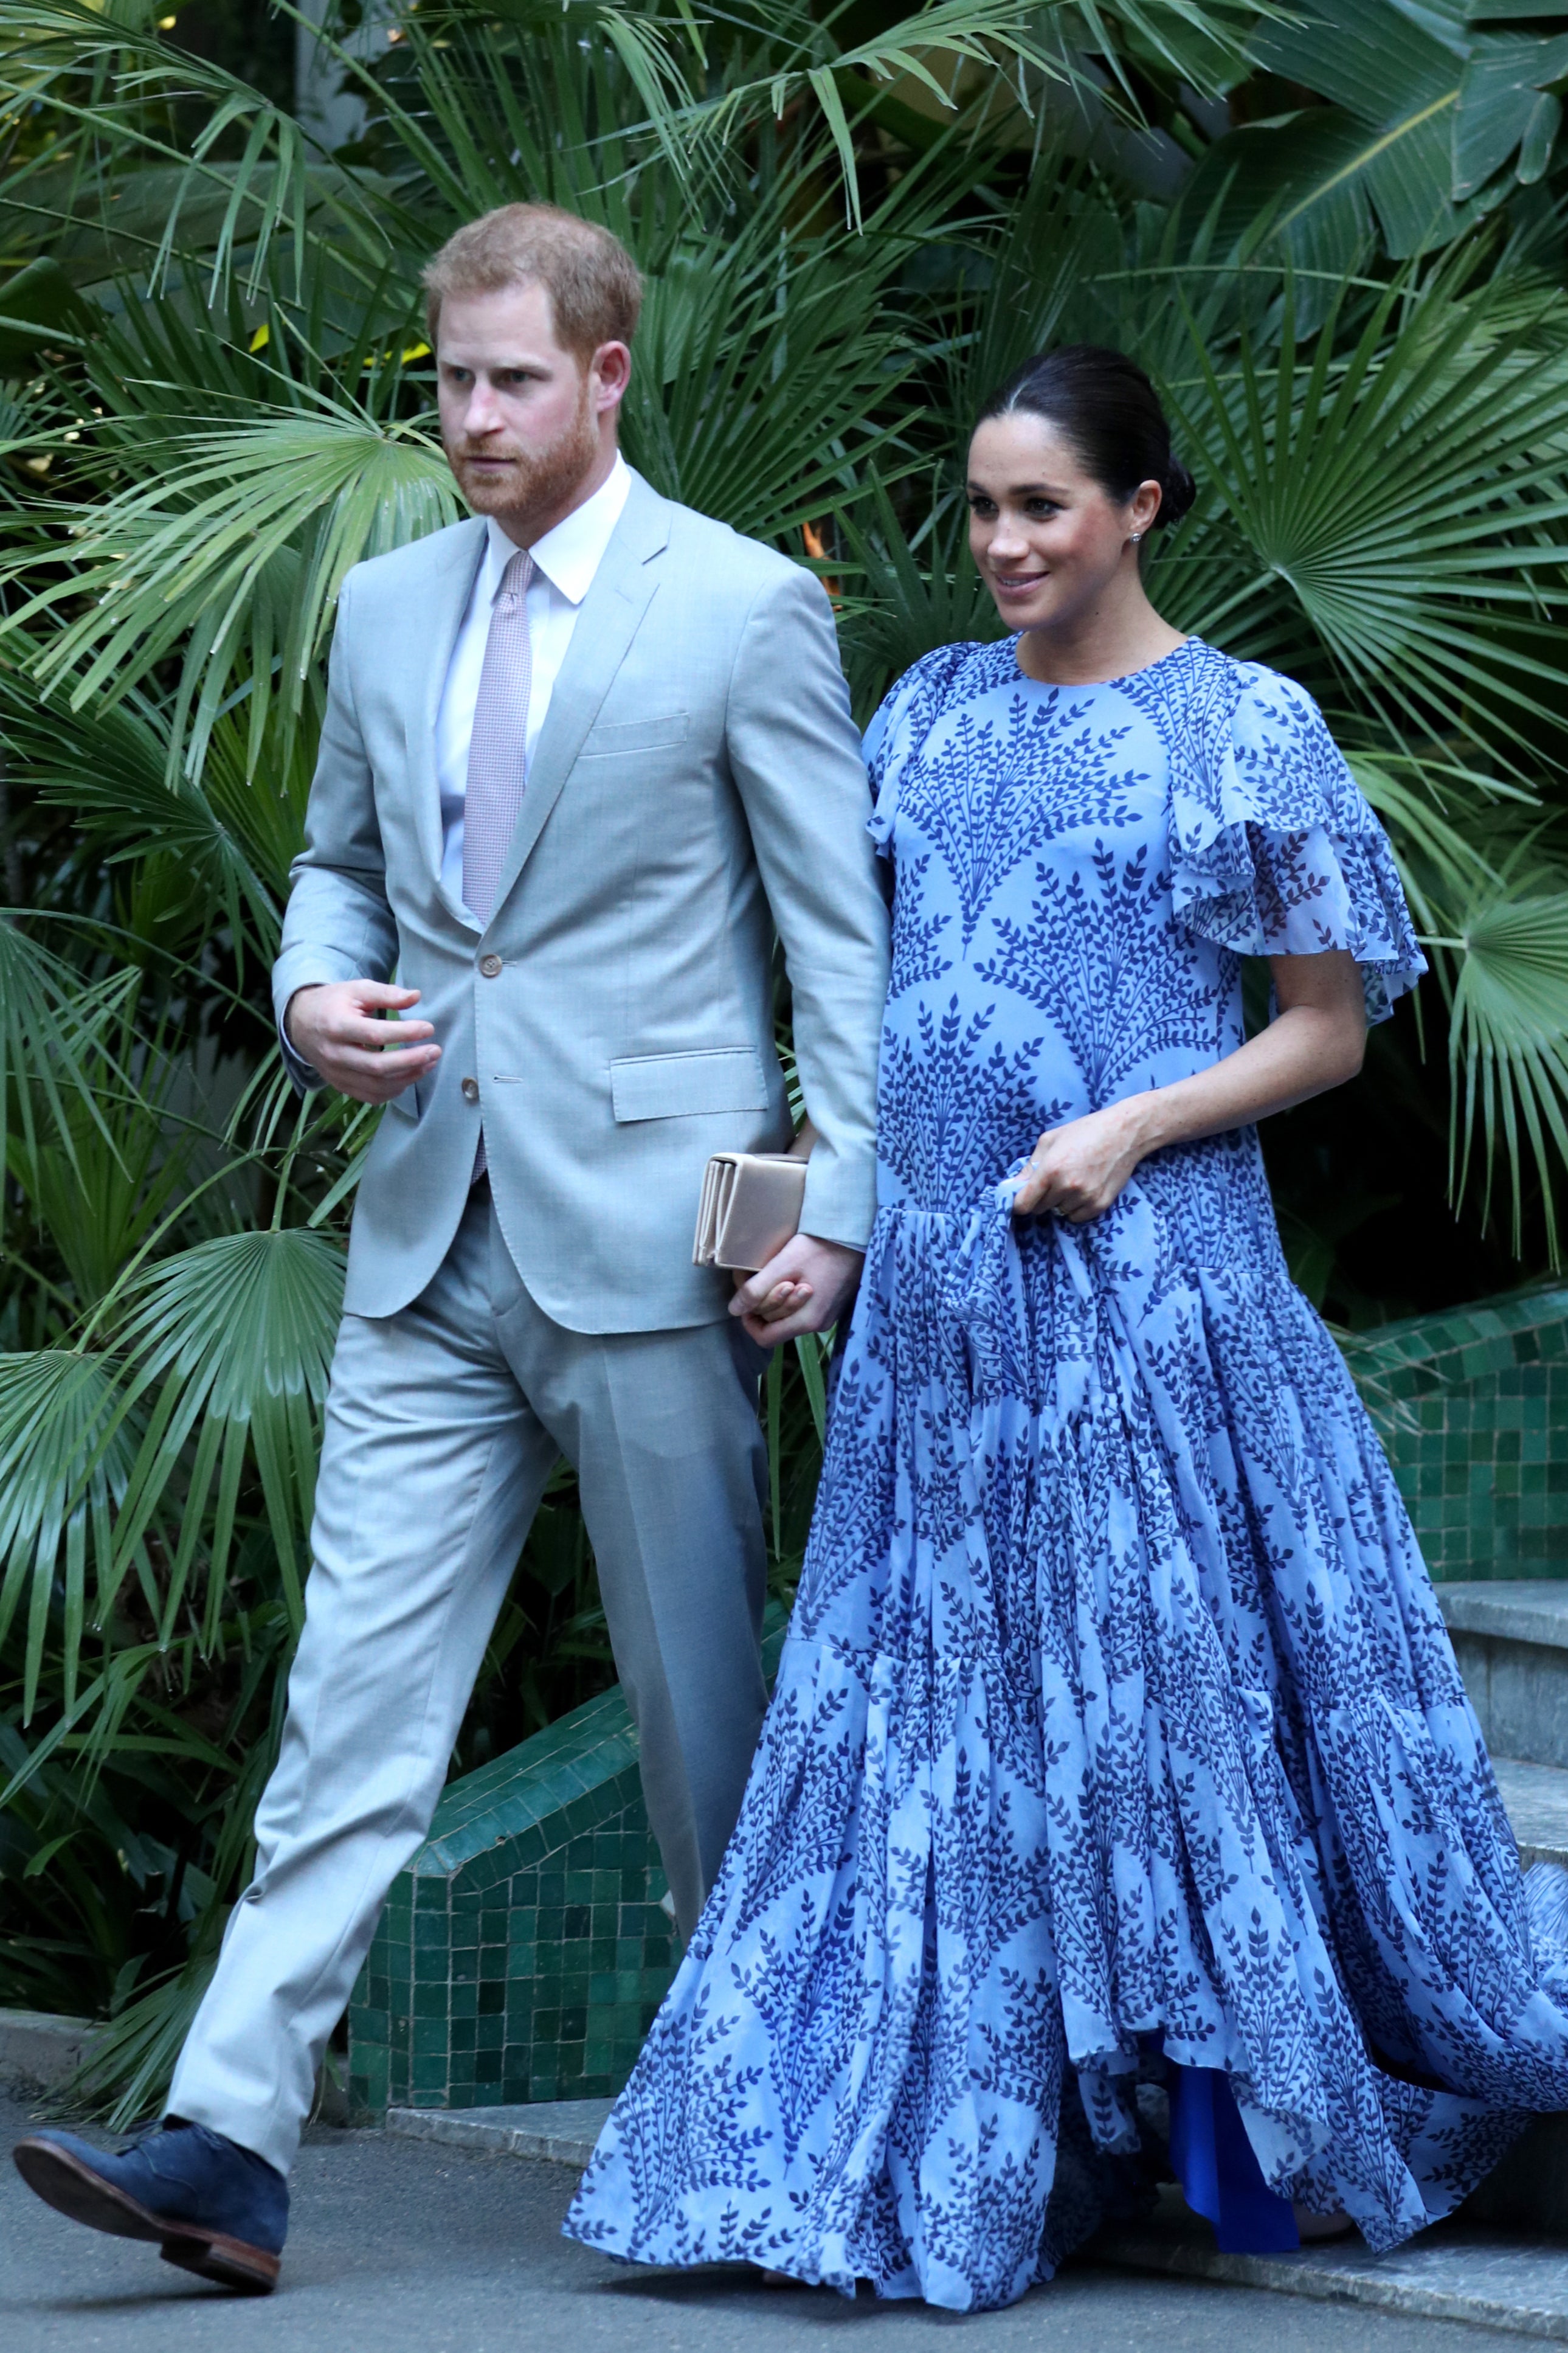 The Duke and Duchess of Sussex in 2019